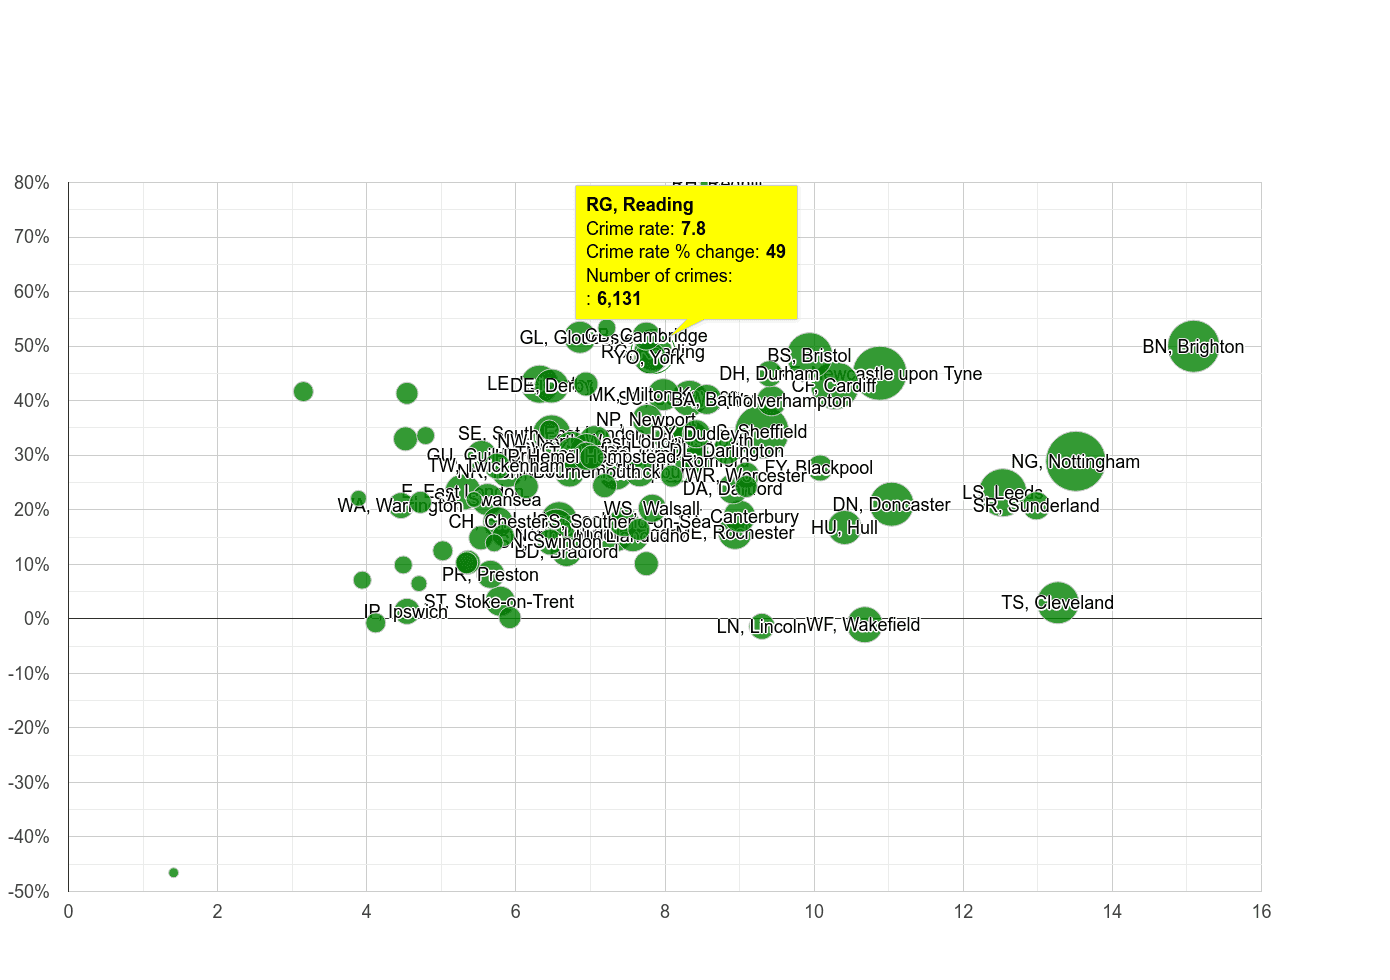 Reading shoplifting crime rate compared to other areas